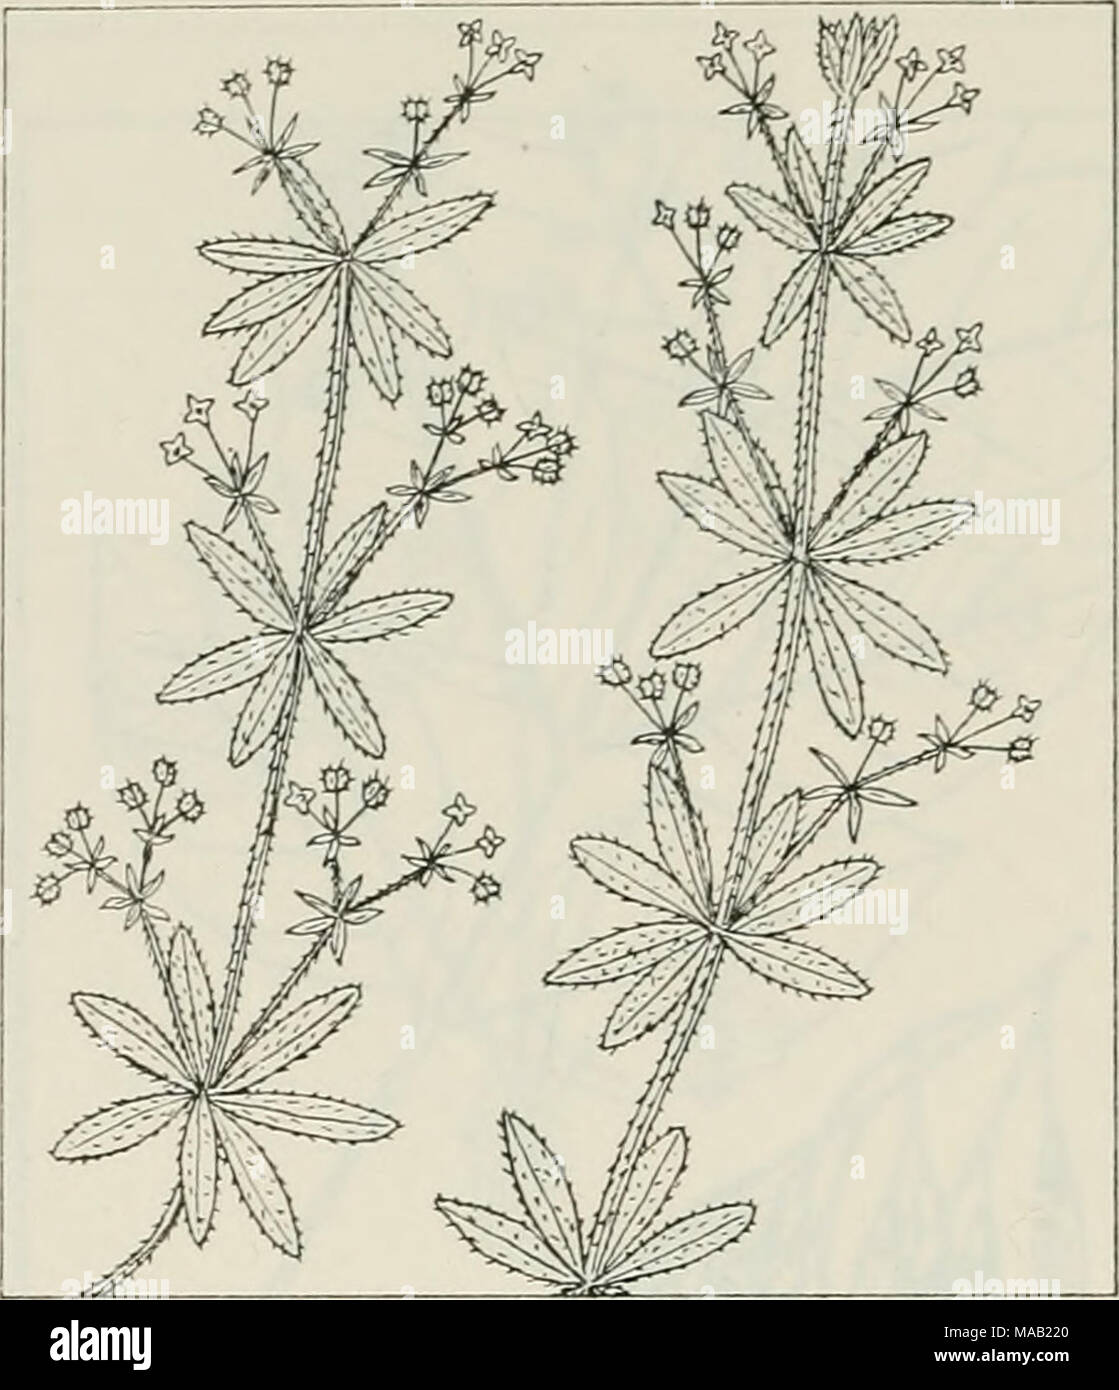 . The drug plants of Illinois . GALIUM APARINE L. Cleaver's herb, cleavers, goose grass. Rubiaceae. —A low, weak, reclining or scrambling, prickly herb, annual; stem square, with recurved prickles, 2 to 5 feet long; leaves oblanceolate, 1 to 3 inches long, 6 or 8 at a node, hispid and rough on the margin and midrib; flowers white, small, in groups (1 to 3) on axillary peduncles; fruit appearing double, fleshy, covered with hooked prickles. The herb collected. Common through- out the state in gardens, along roads and streams, and in moist woods; May and early June. The species of Galium contain Stock Photo